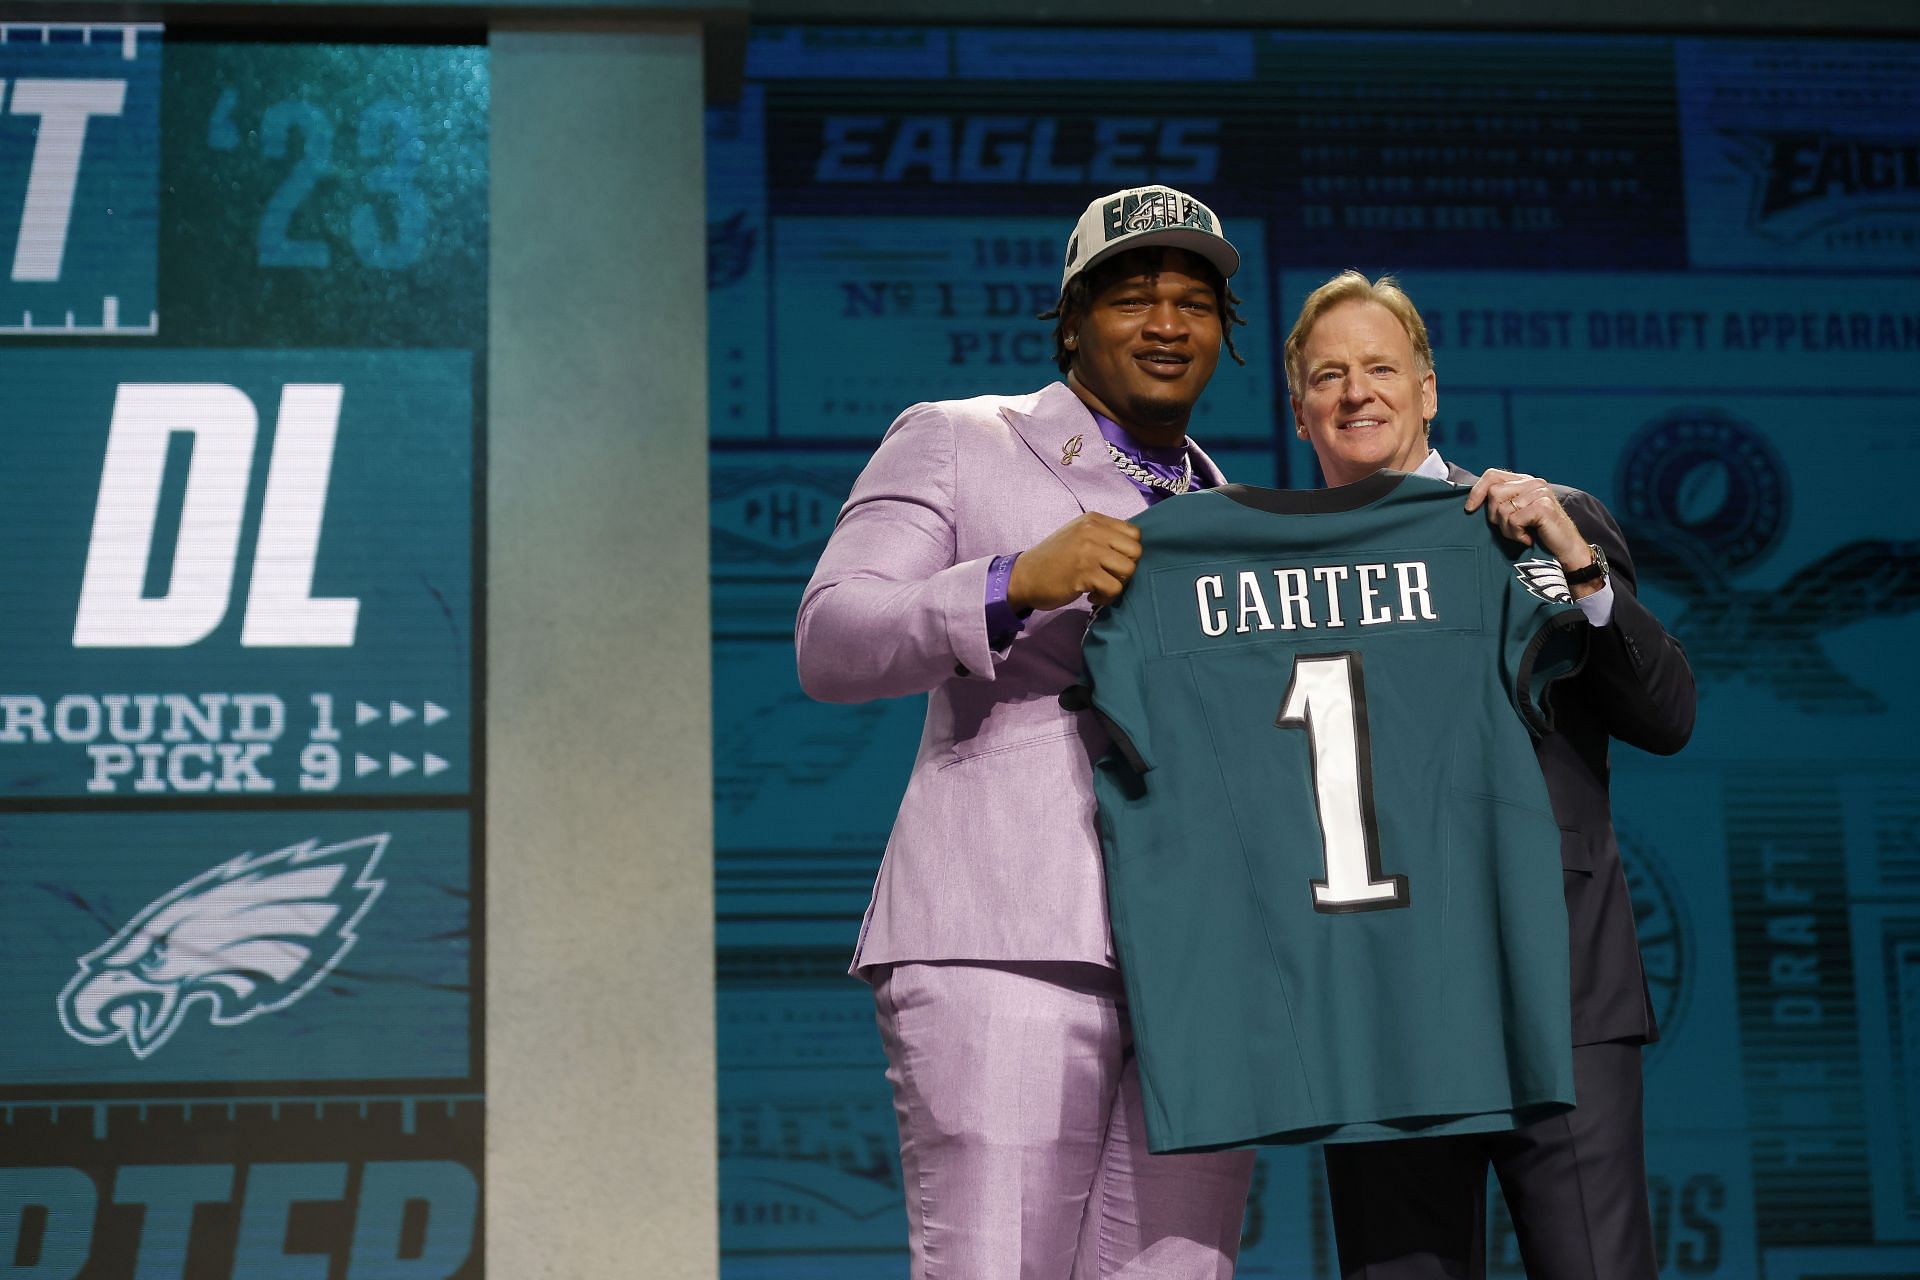 Carter was drafted by the Eagles